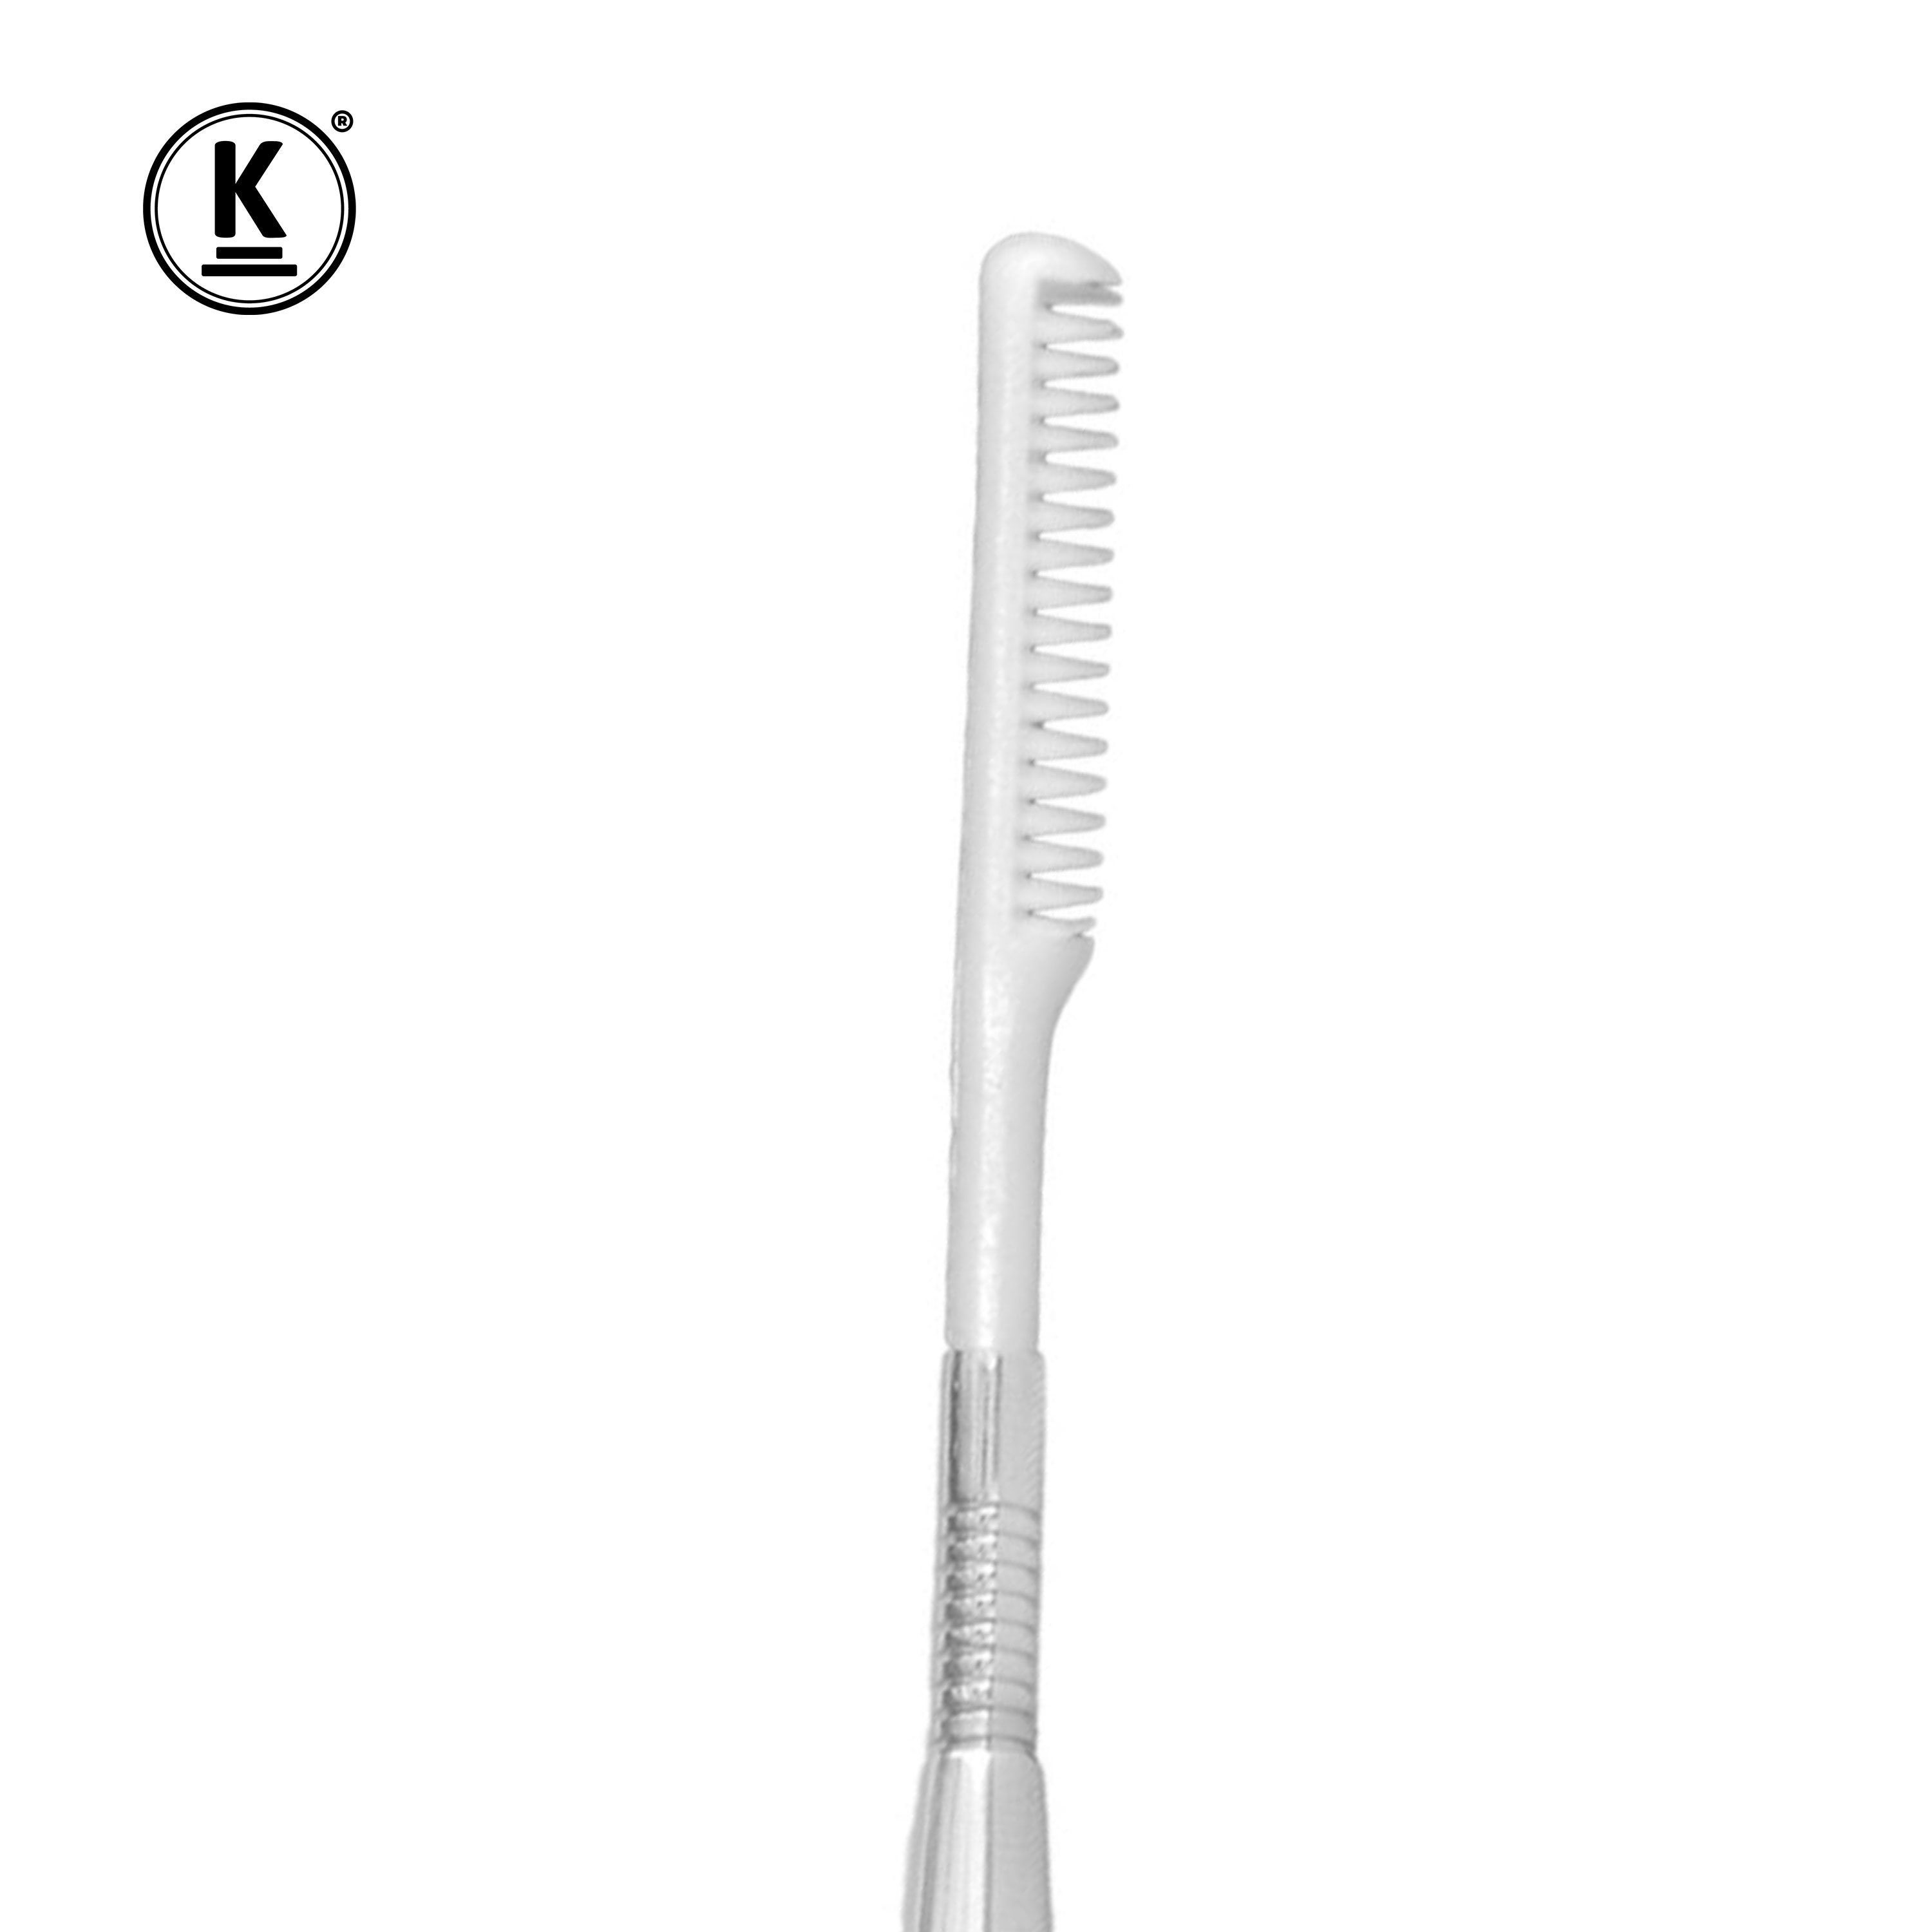 K-Pro Wimpernkamm Wimpern Lifting Tool Seperator Kamm & - Wimpernlifting